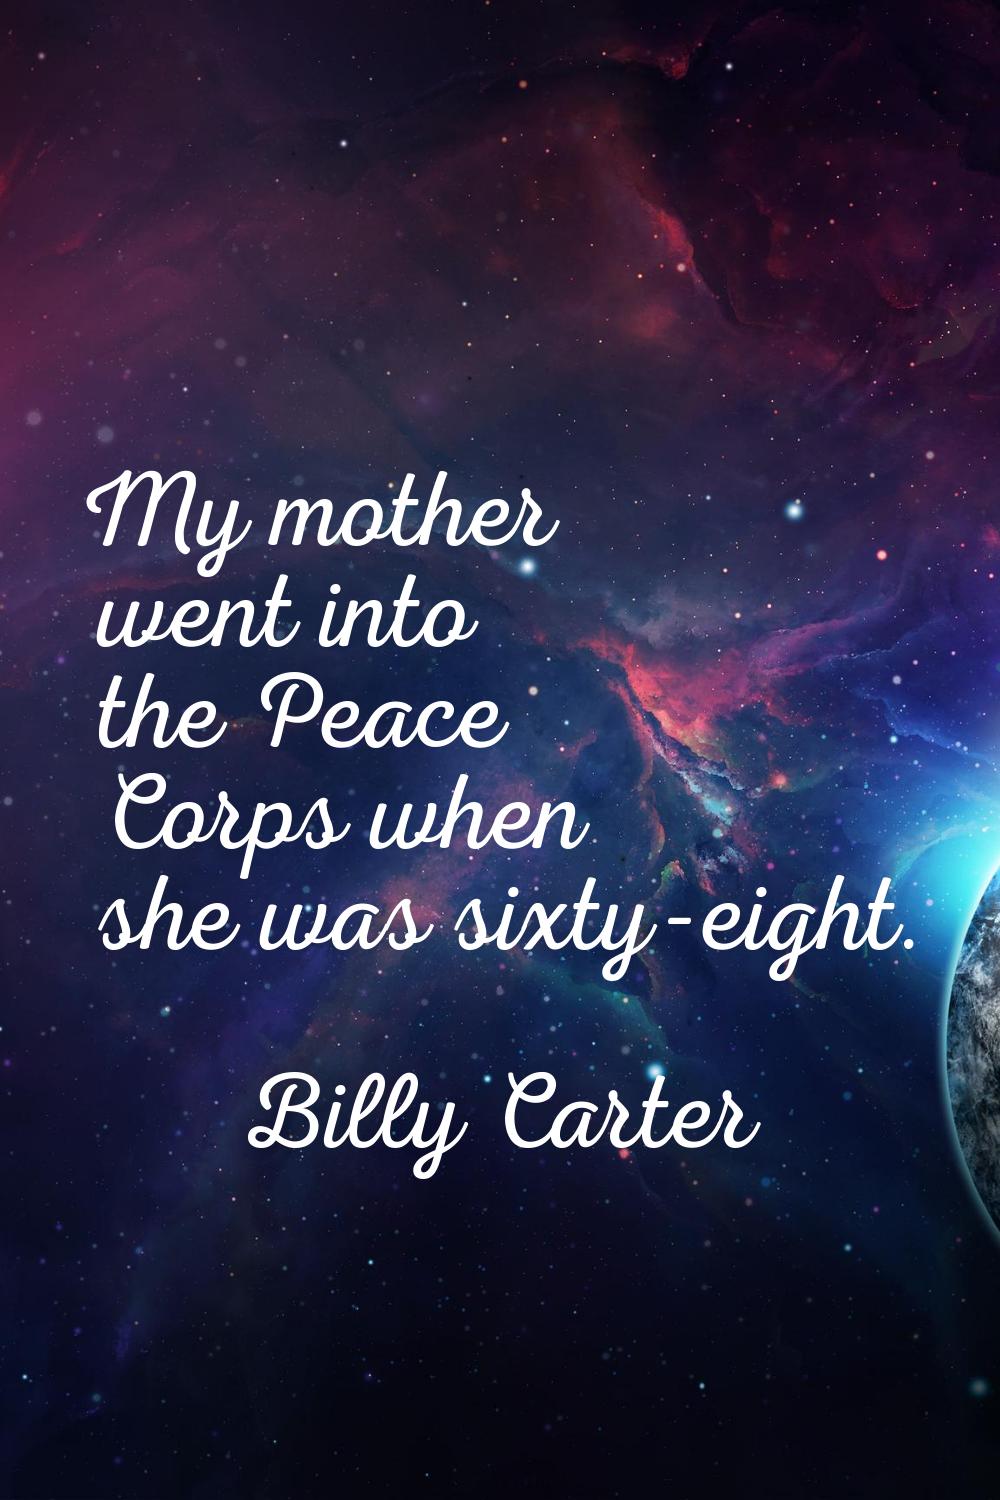 My mother went into the Peace Corps when she was sixty-eight.